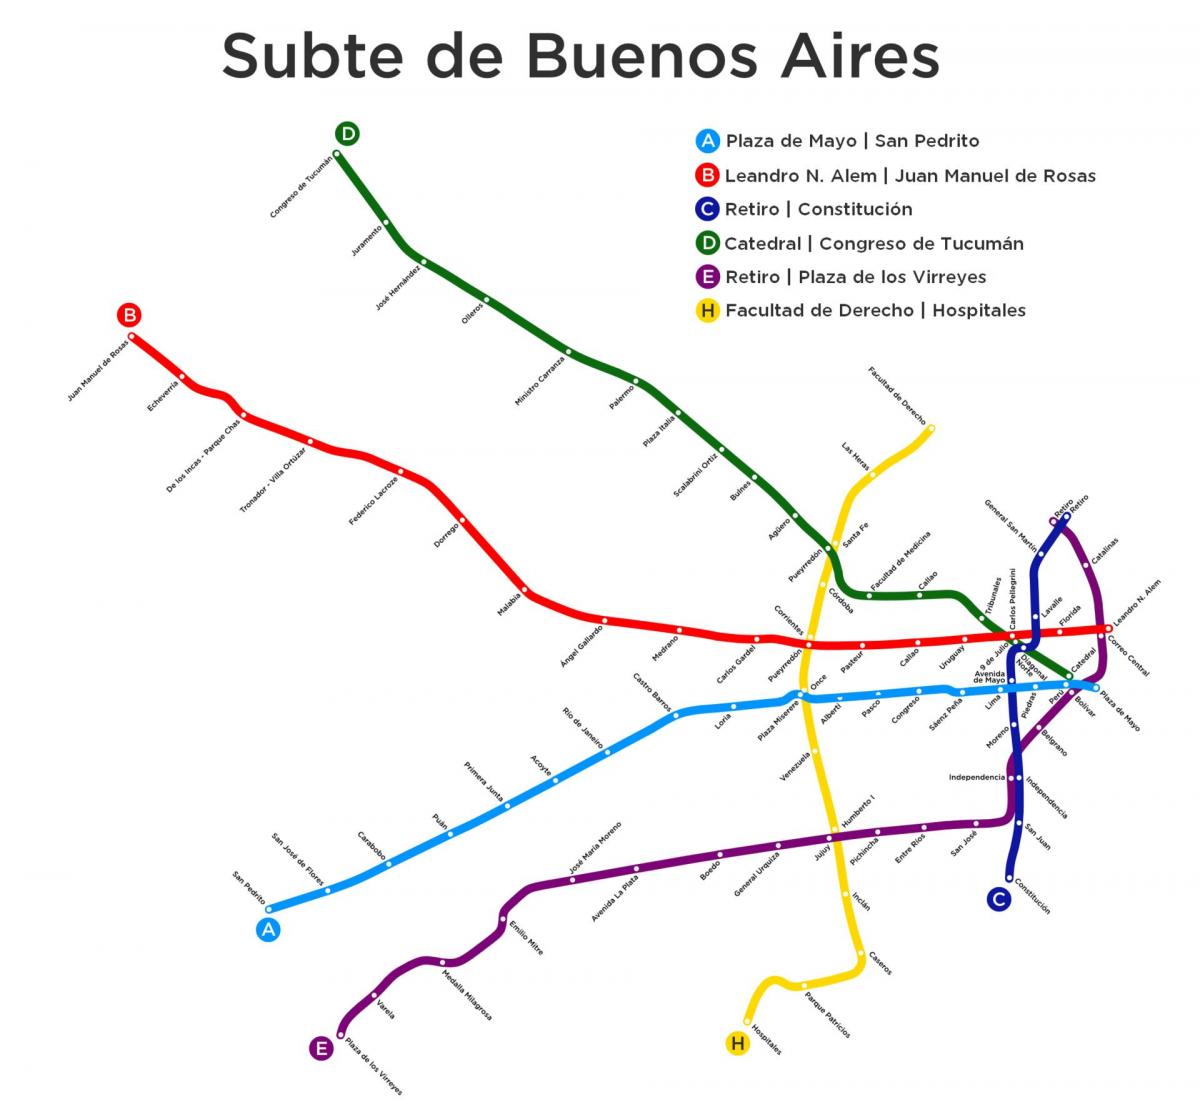 Buenos Aires subway station map